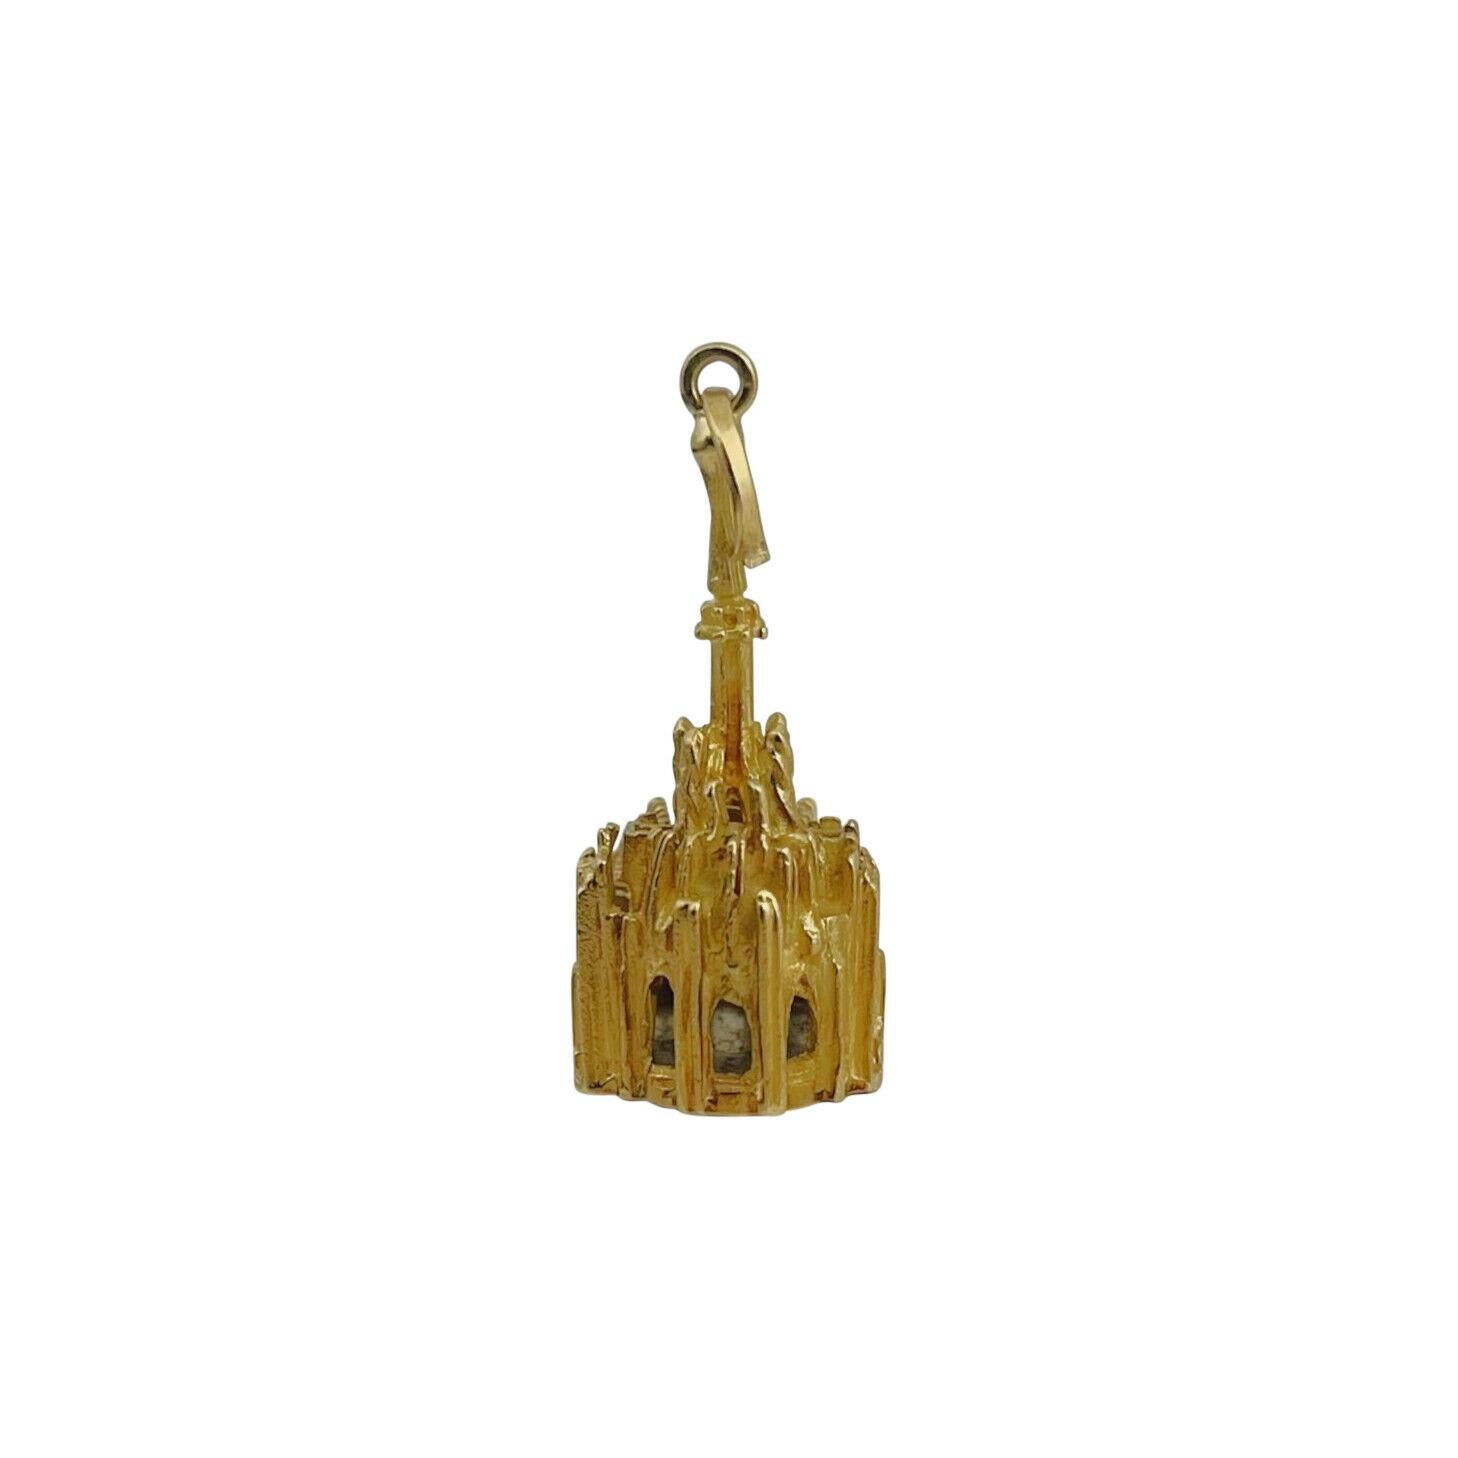 18k Yellow Gold 12.6g Solid Barcelona Cathedral Charm Pendant Italy

Condition:  Excellent Condition, Professionally Cleaned and Polished
Metal:  18k Gold (Marked, and Professionally Tested)
Weight:  12.6g
Length:  1.3 Inches
Width:  .5